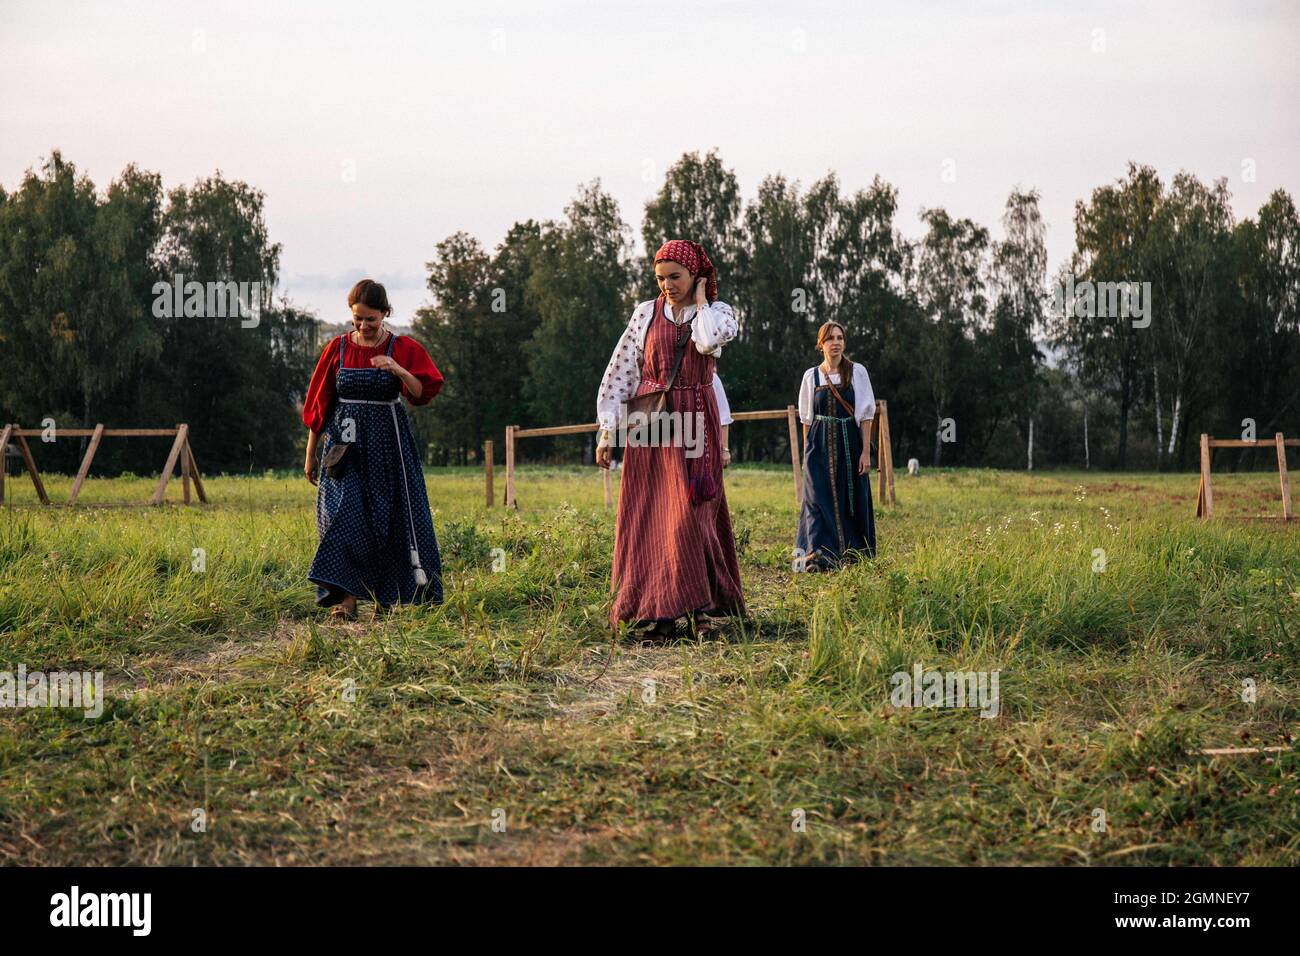 MOSCOW, RUSSIA - Sep 01, 2018: The reenactment of the Battle of Borodino in Russia Stock Photo